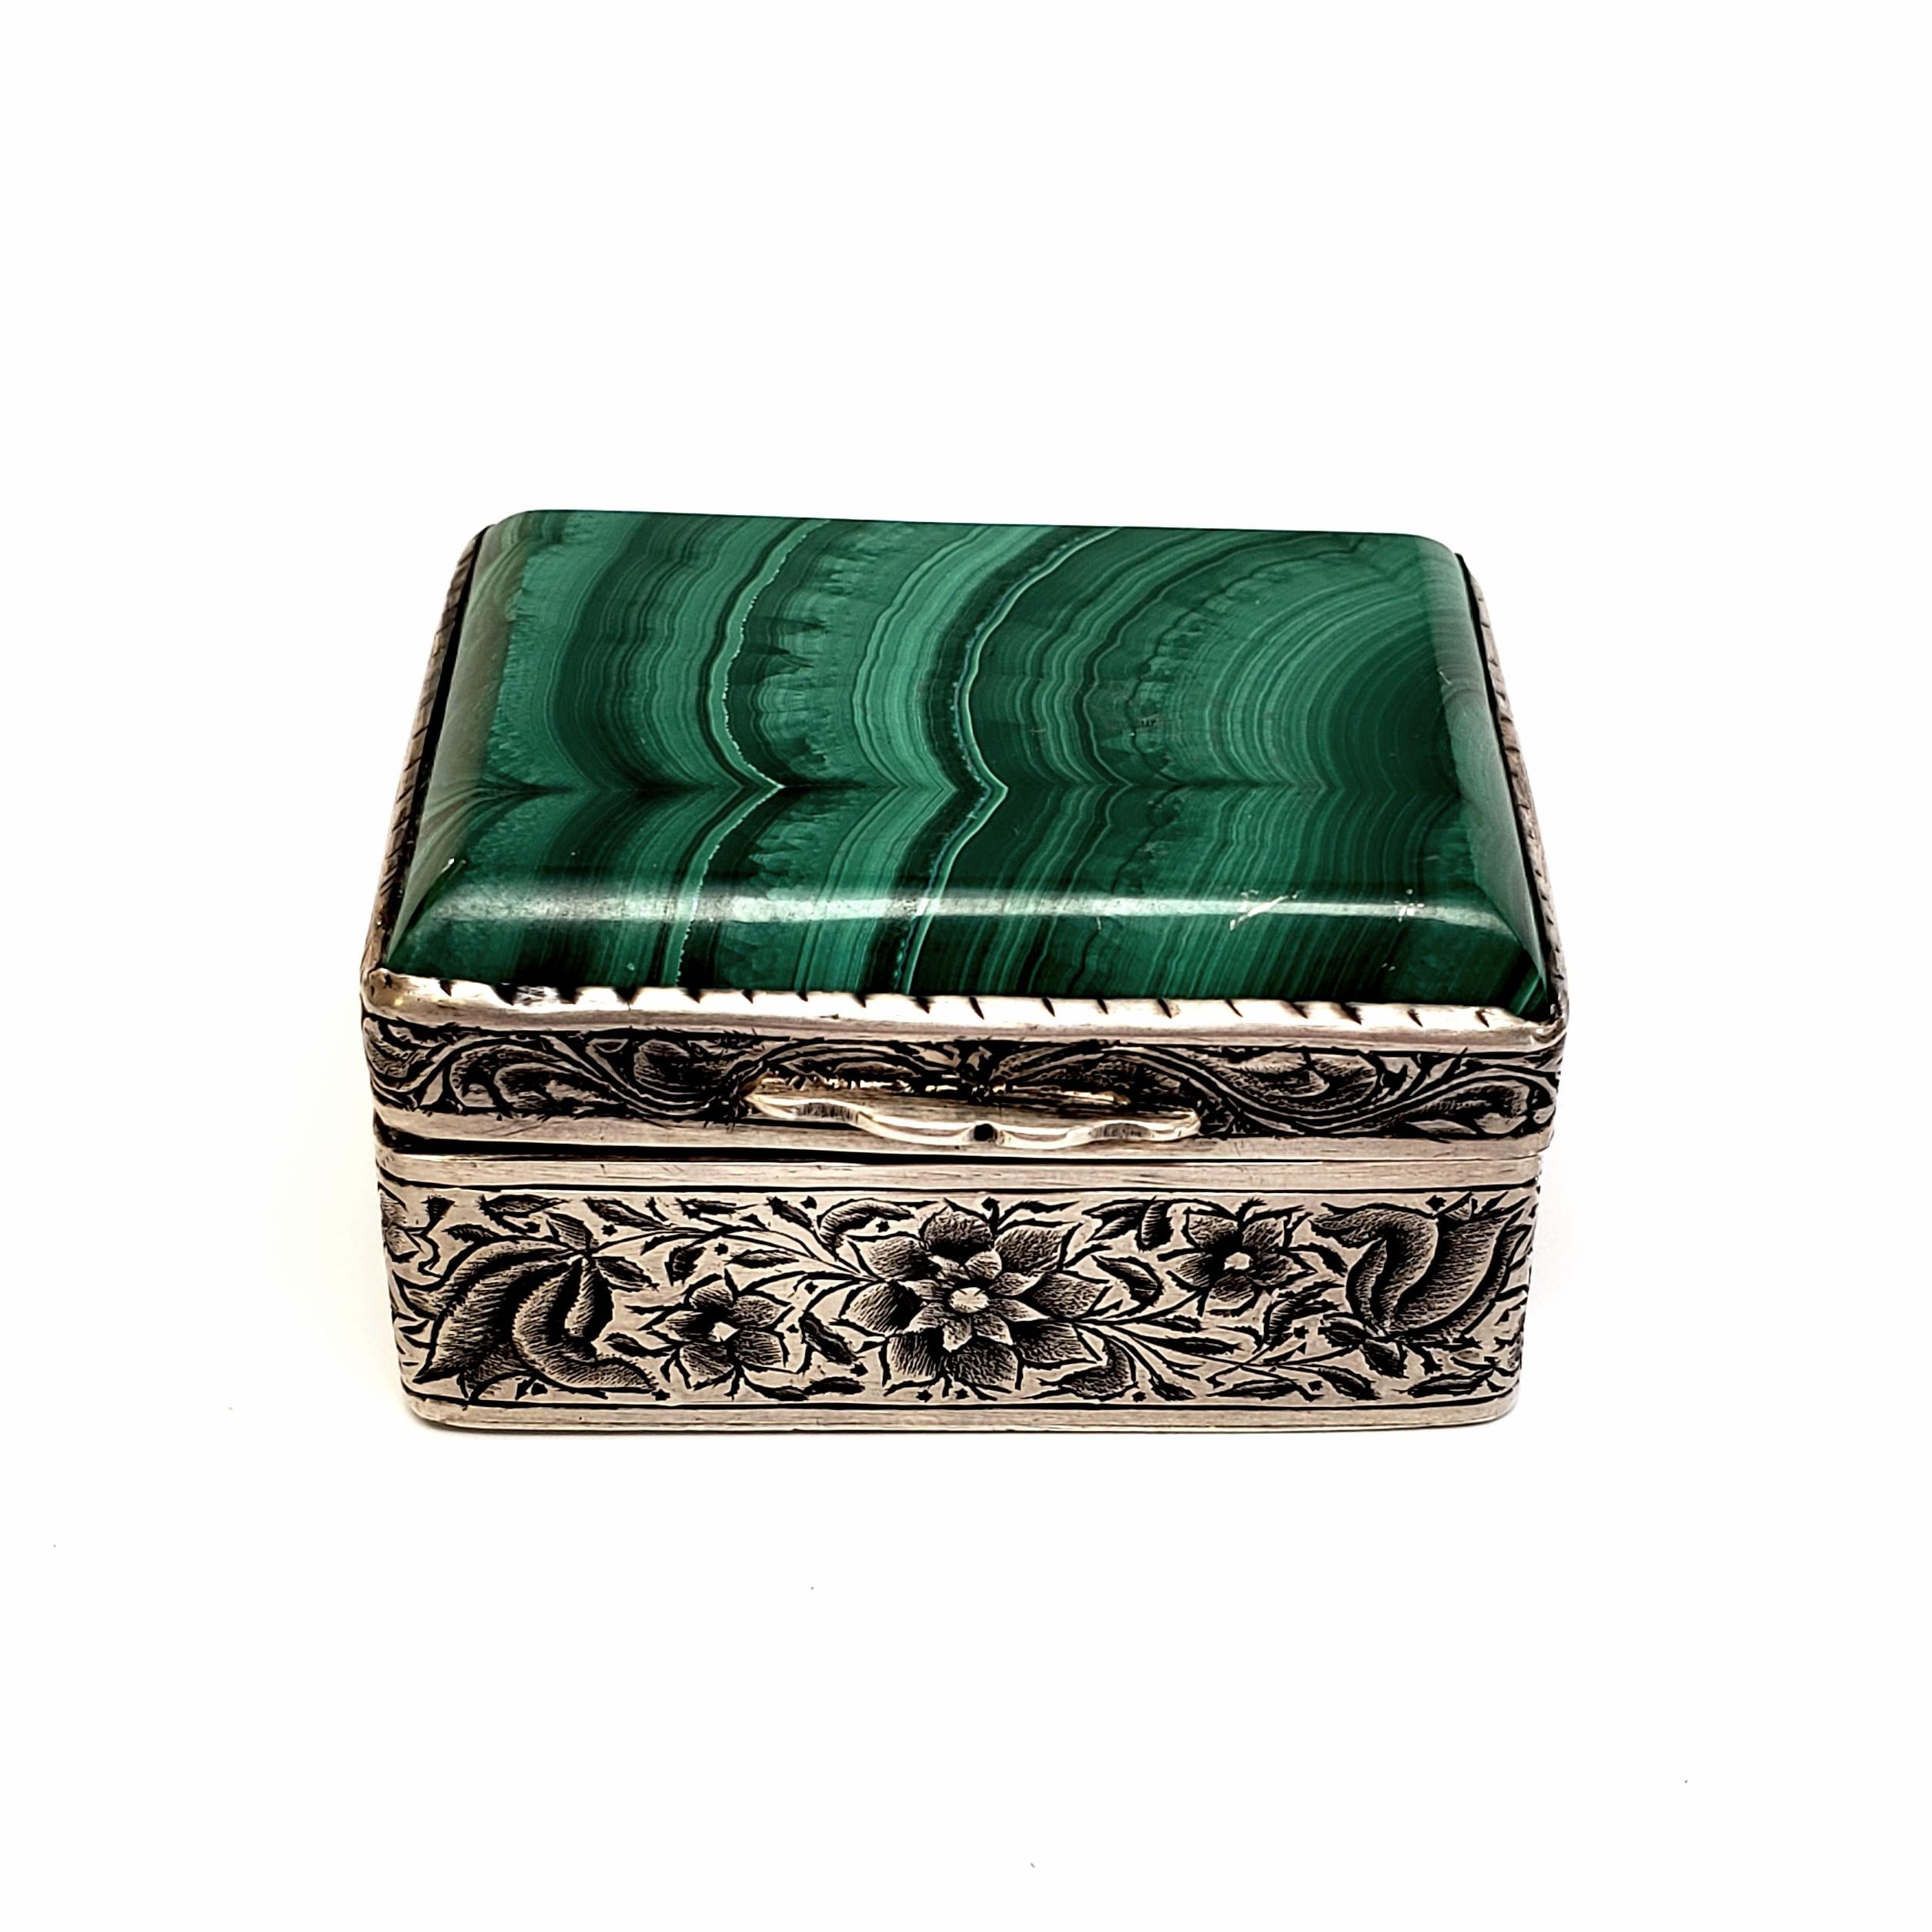 Etched silver trinket box with malachite lid.

Beautiful etched flower and leaf design all around the box. Gorgeous beveled malachite lid.

Box measures approximate: 1 7/8